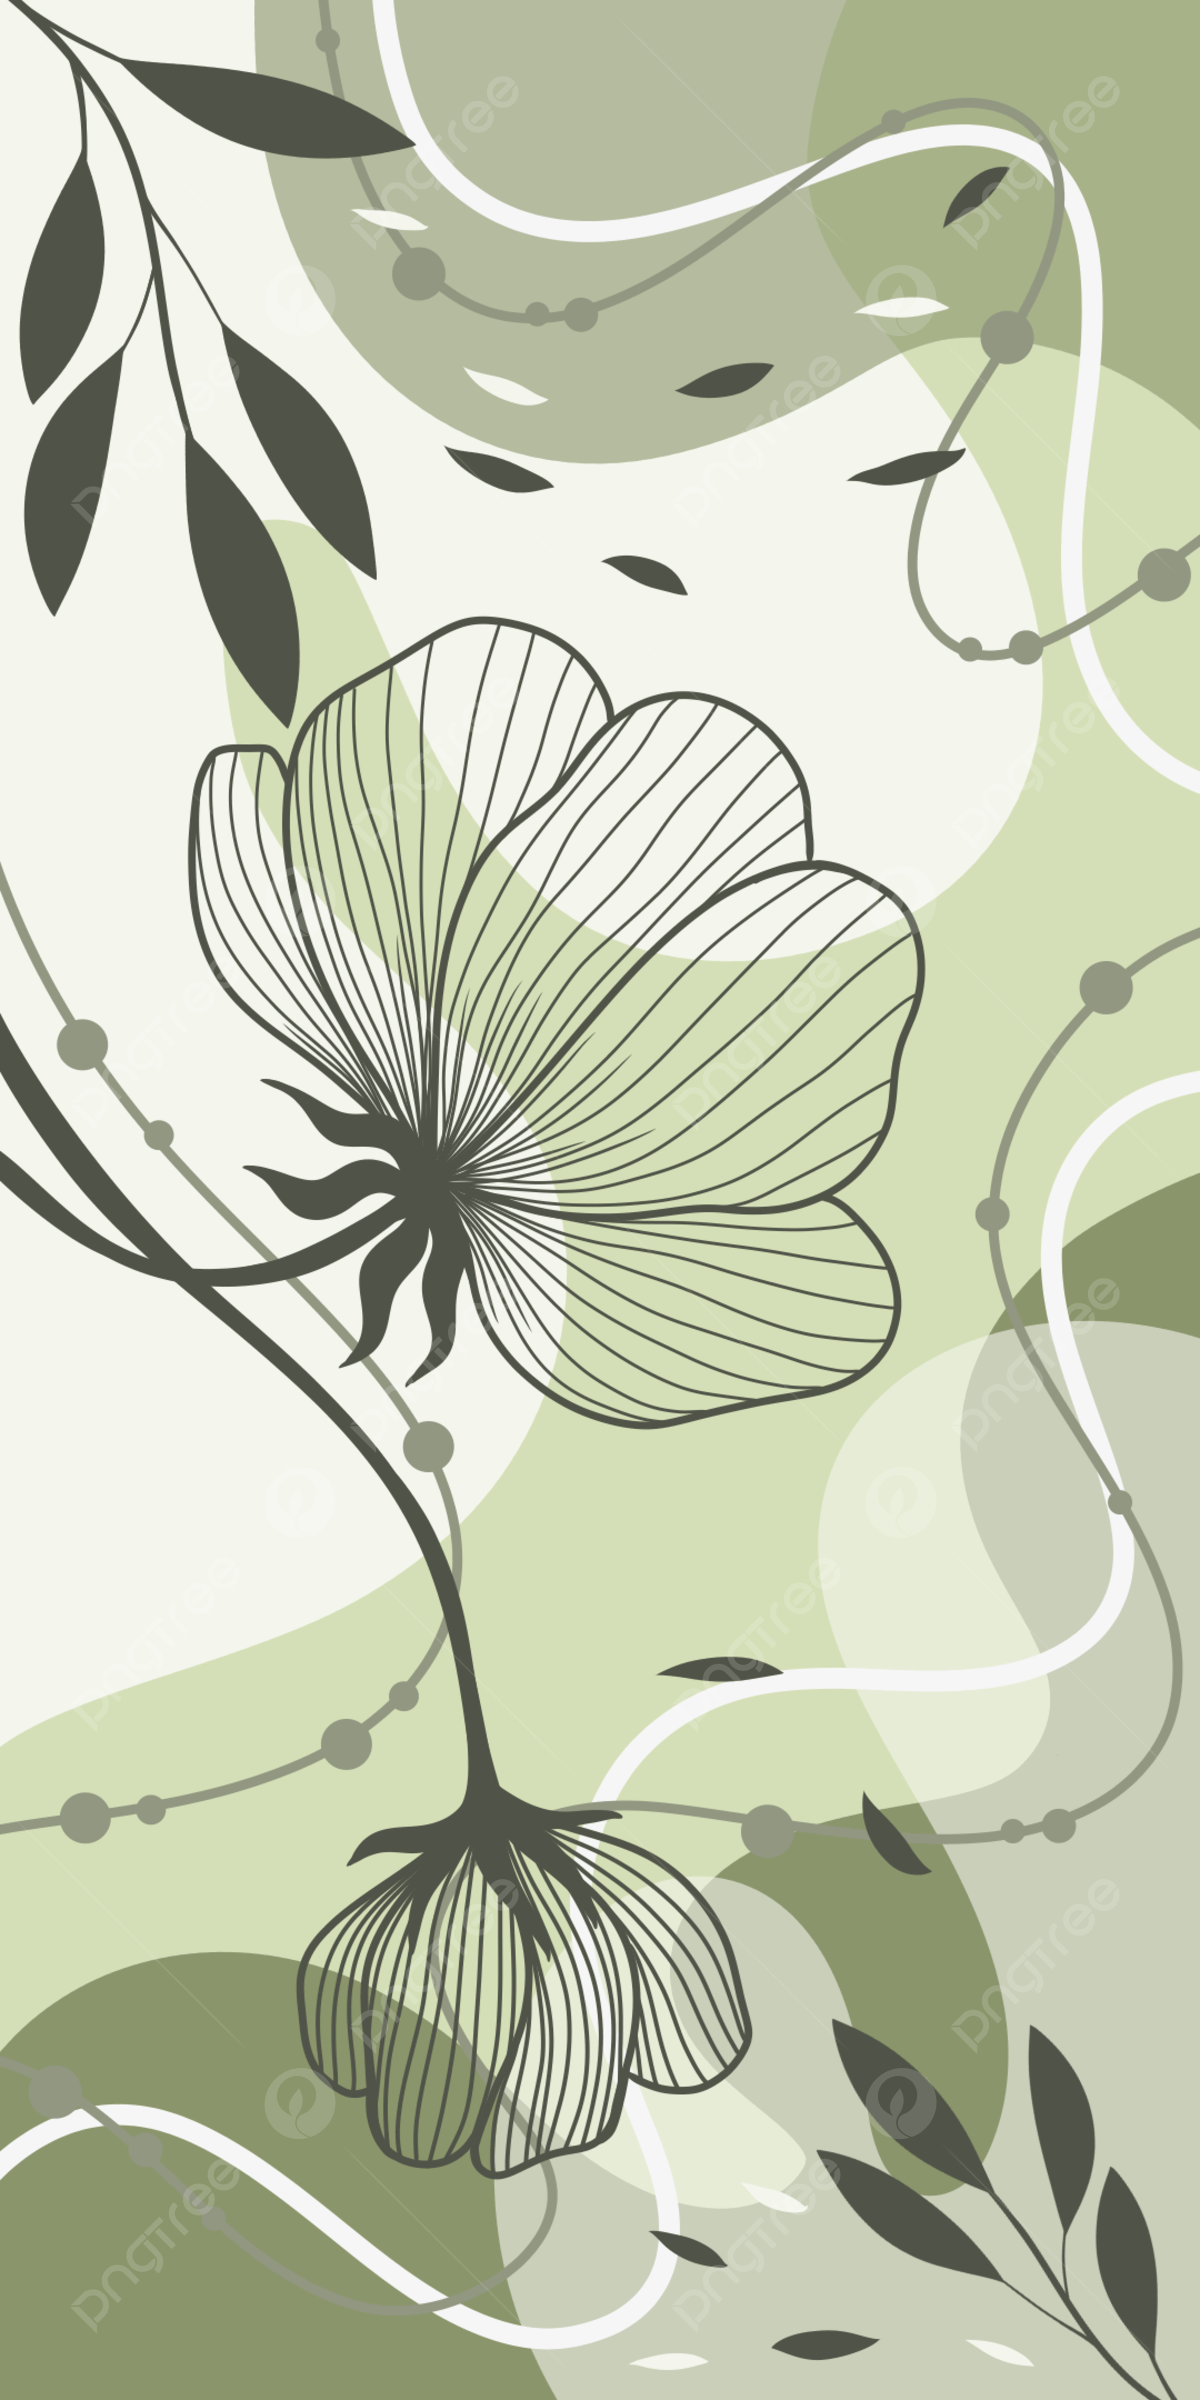 Mint Green Abstract Wallpaper With Aesthetic Line Art Flower Drawing Background Wallpaper Image For Free Download